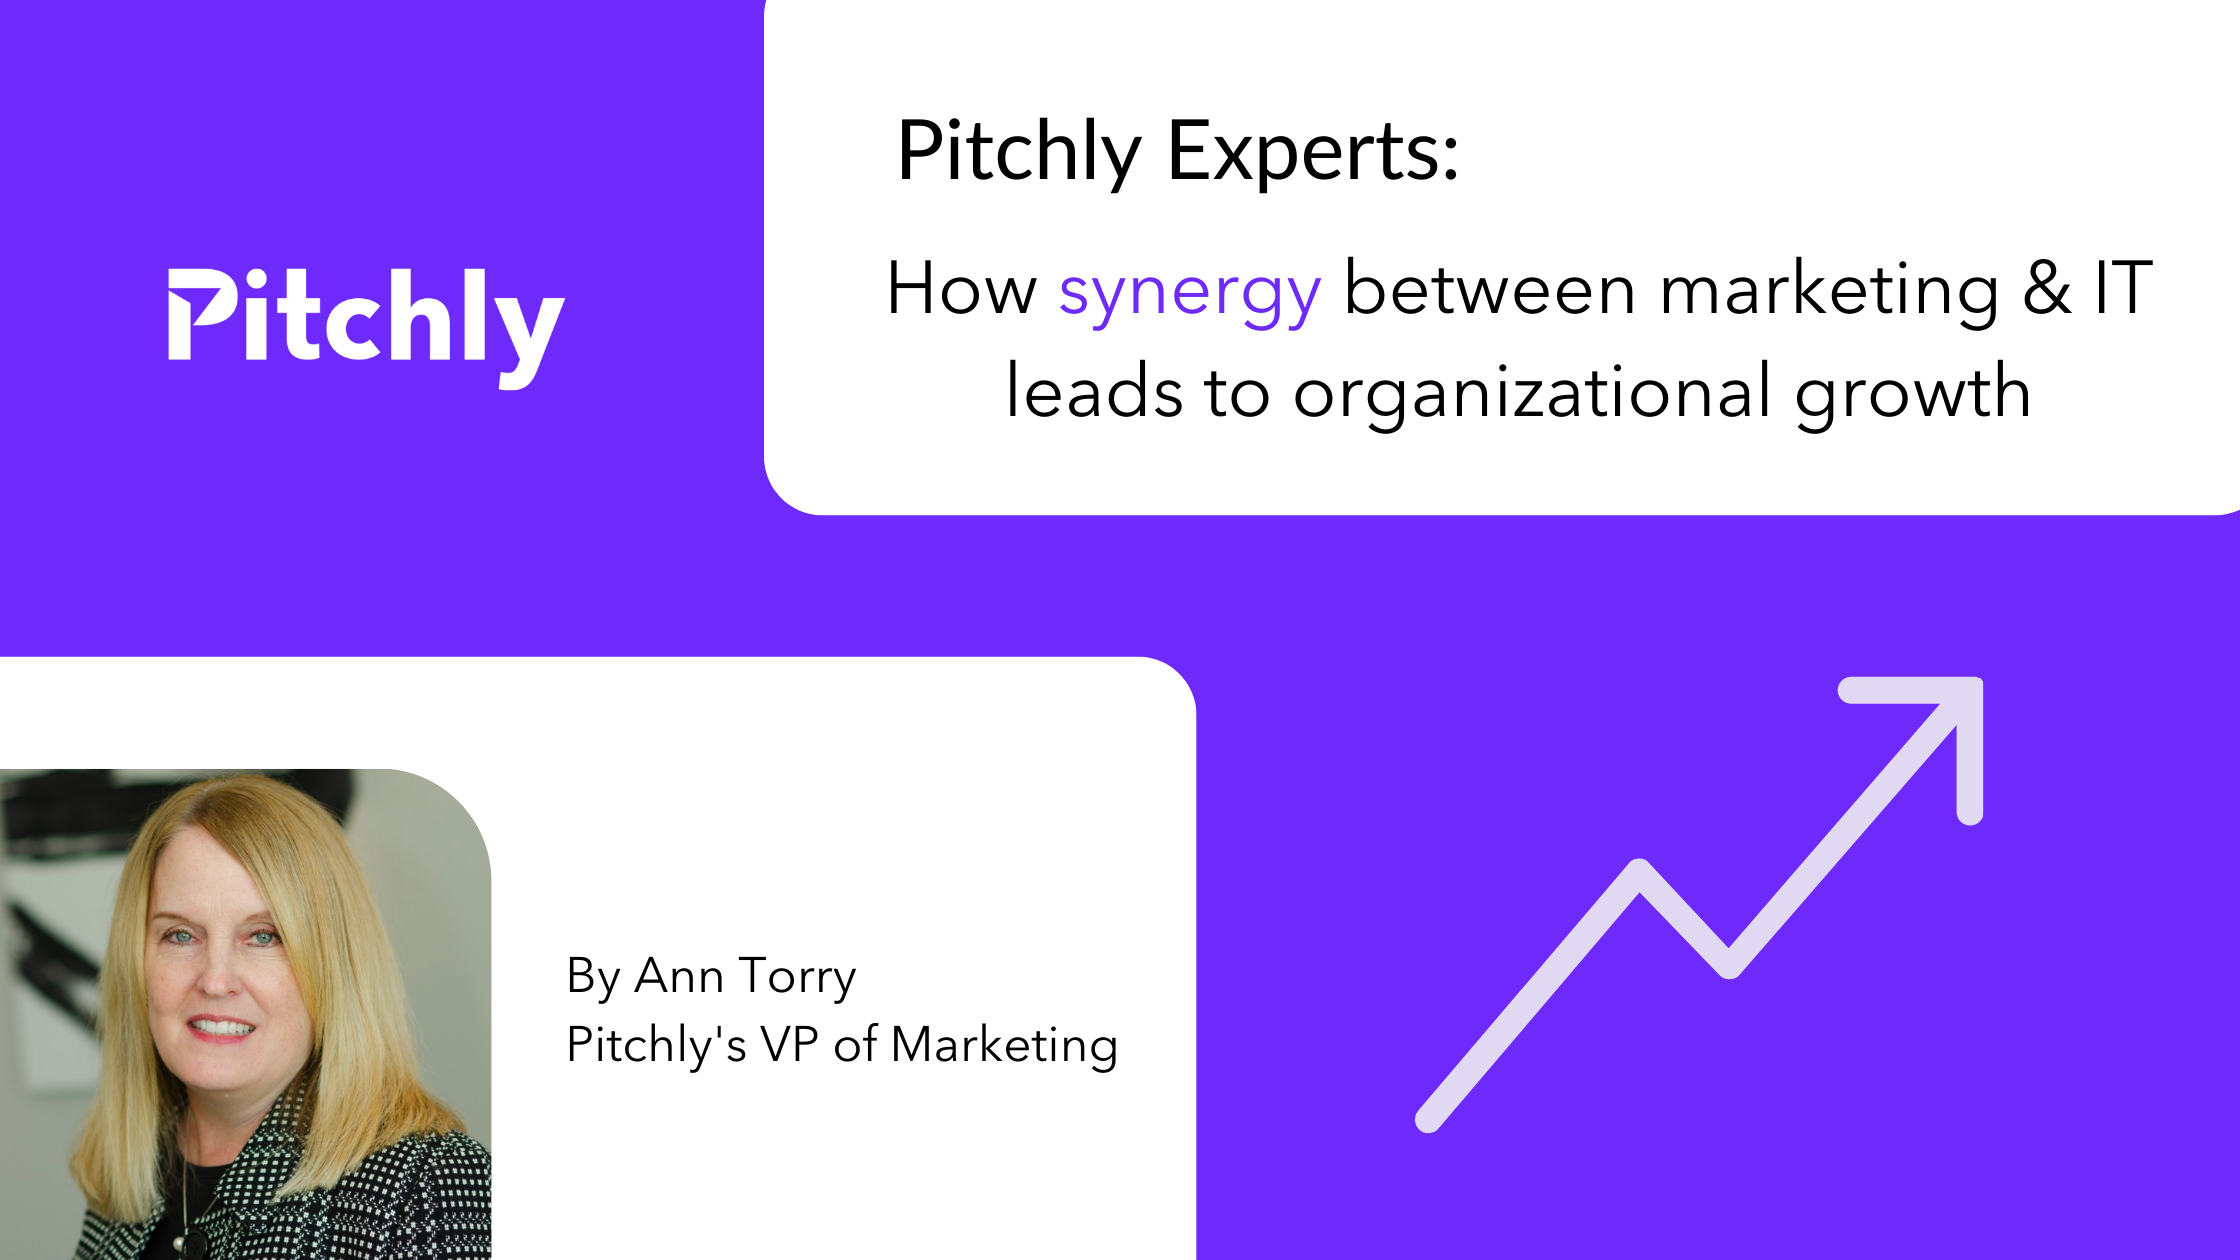 Marketing and IT synergy